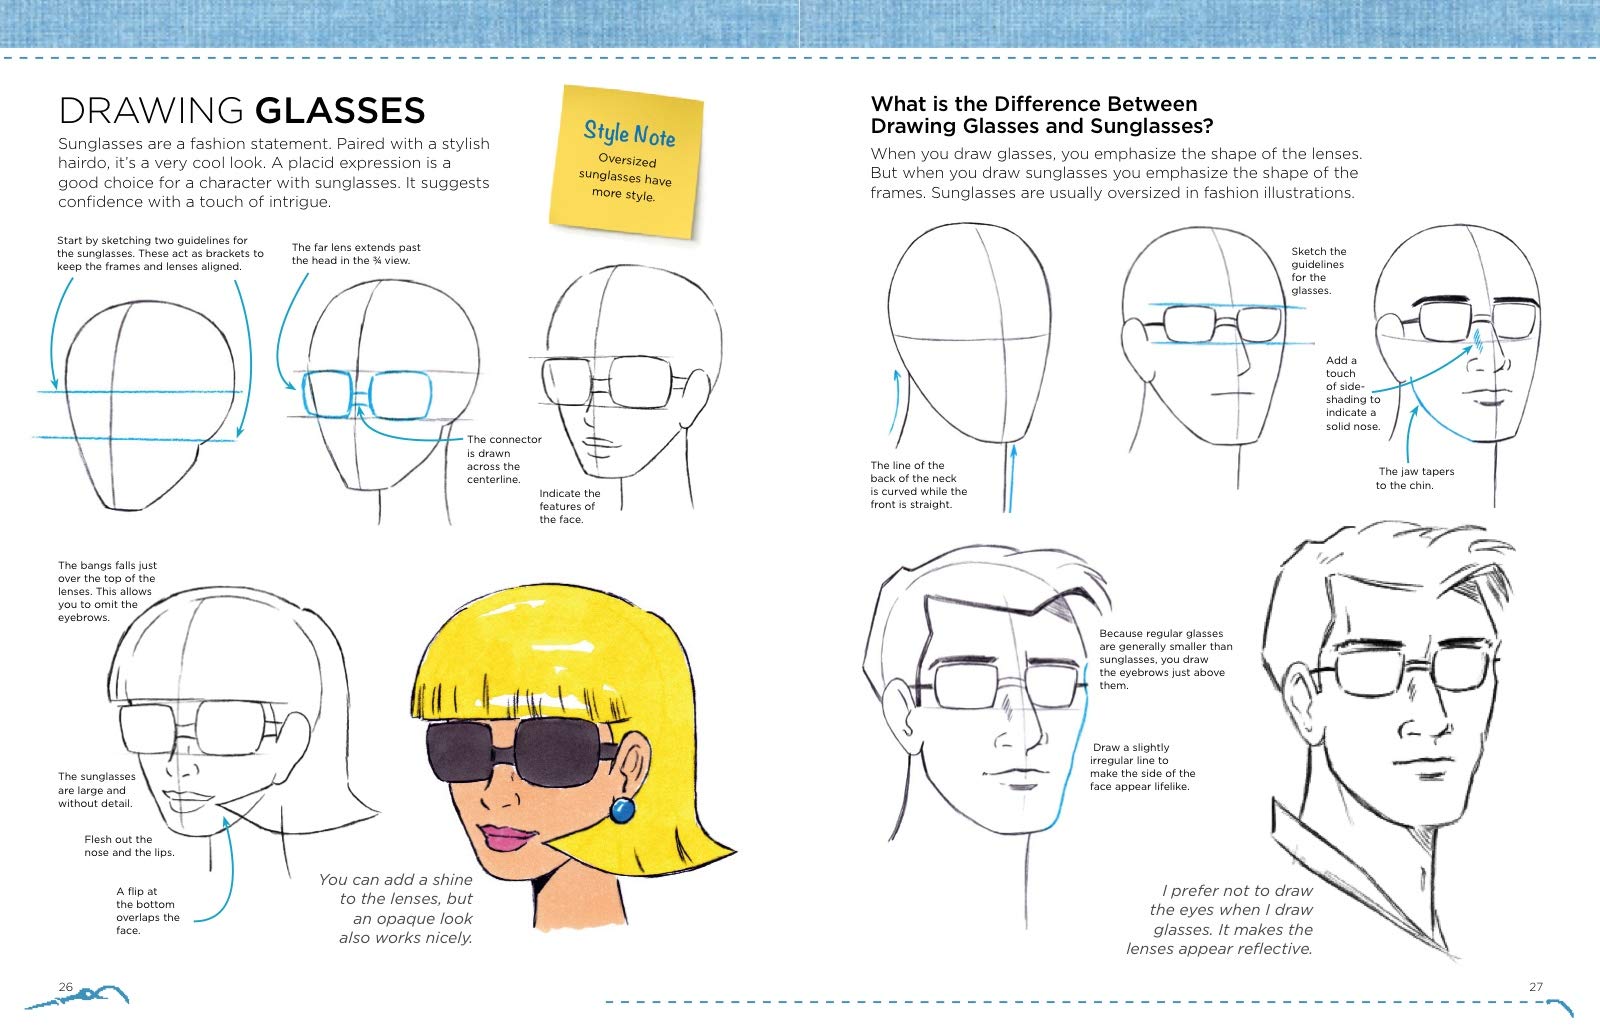 The Beginner's Fashion Design Studio: Easy Templates for Drawing Fashion Favorites